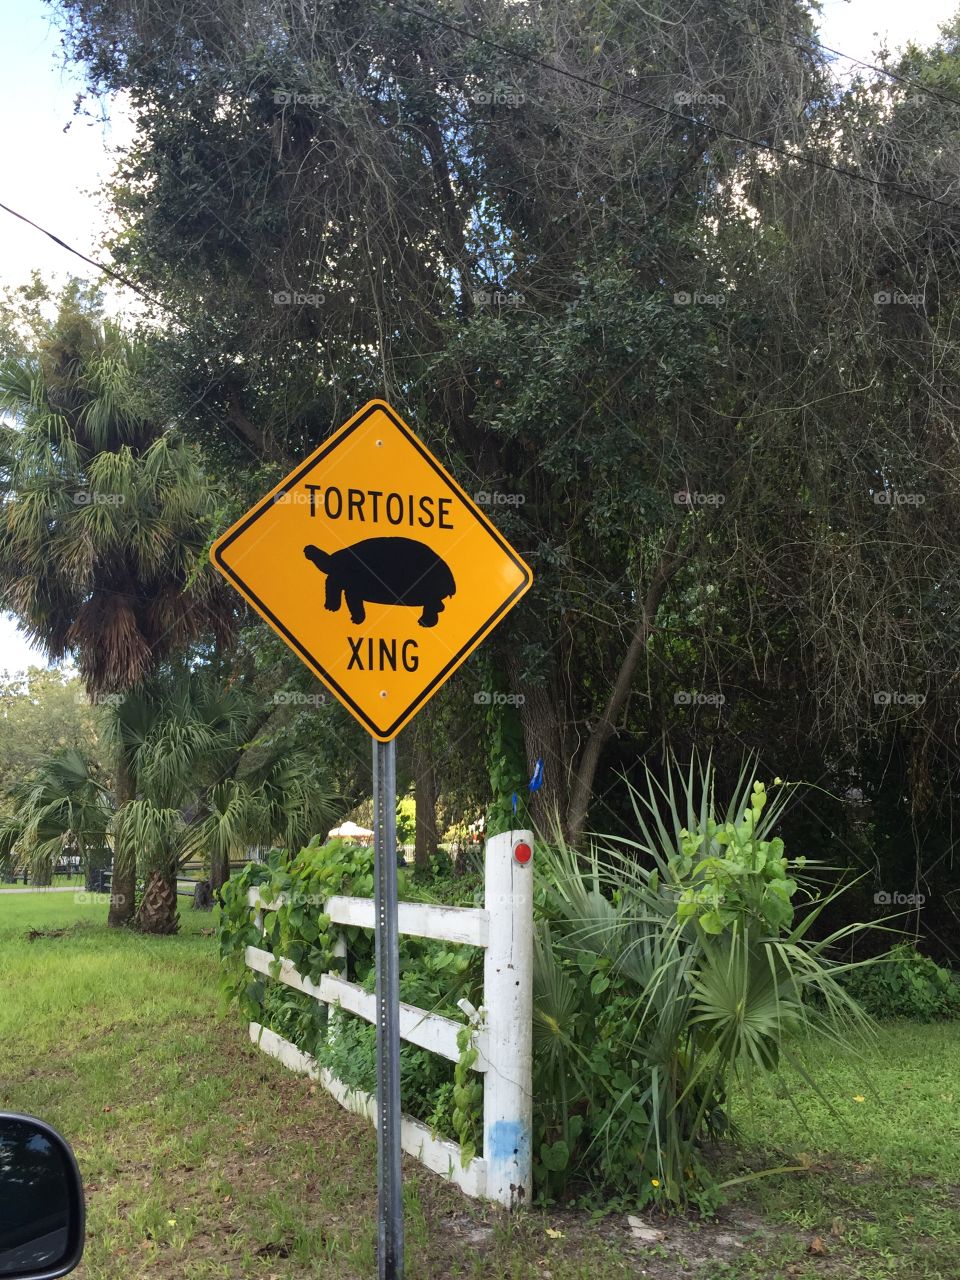 Slow down for the turtle